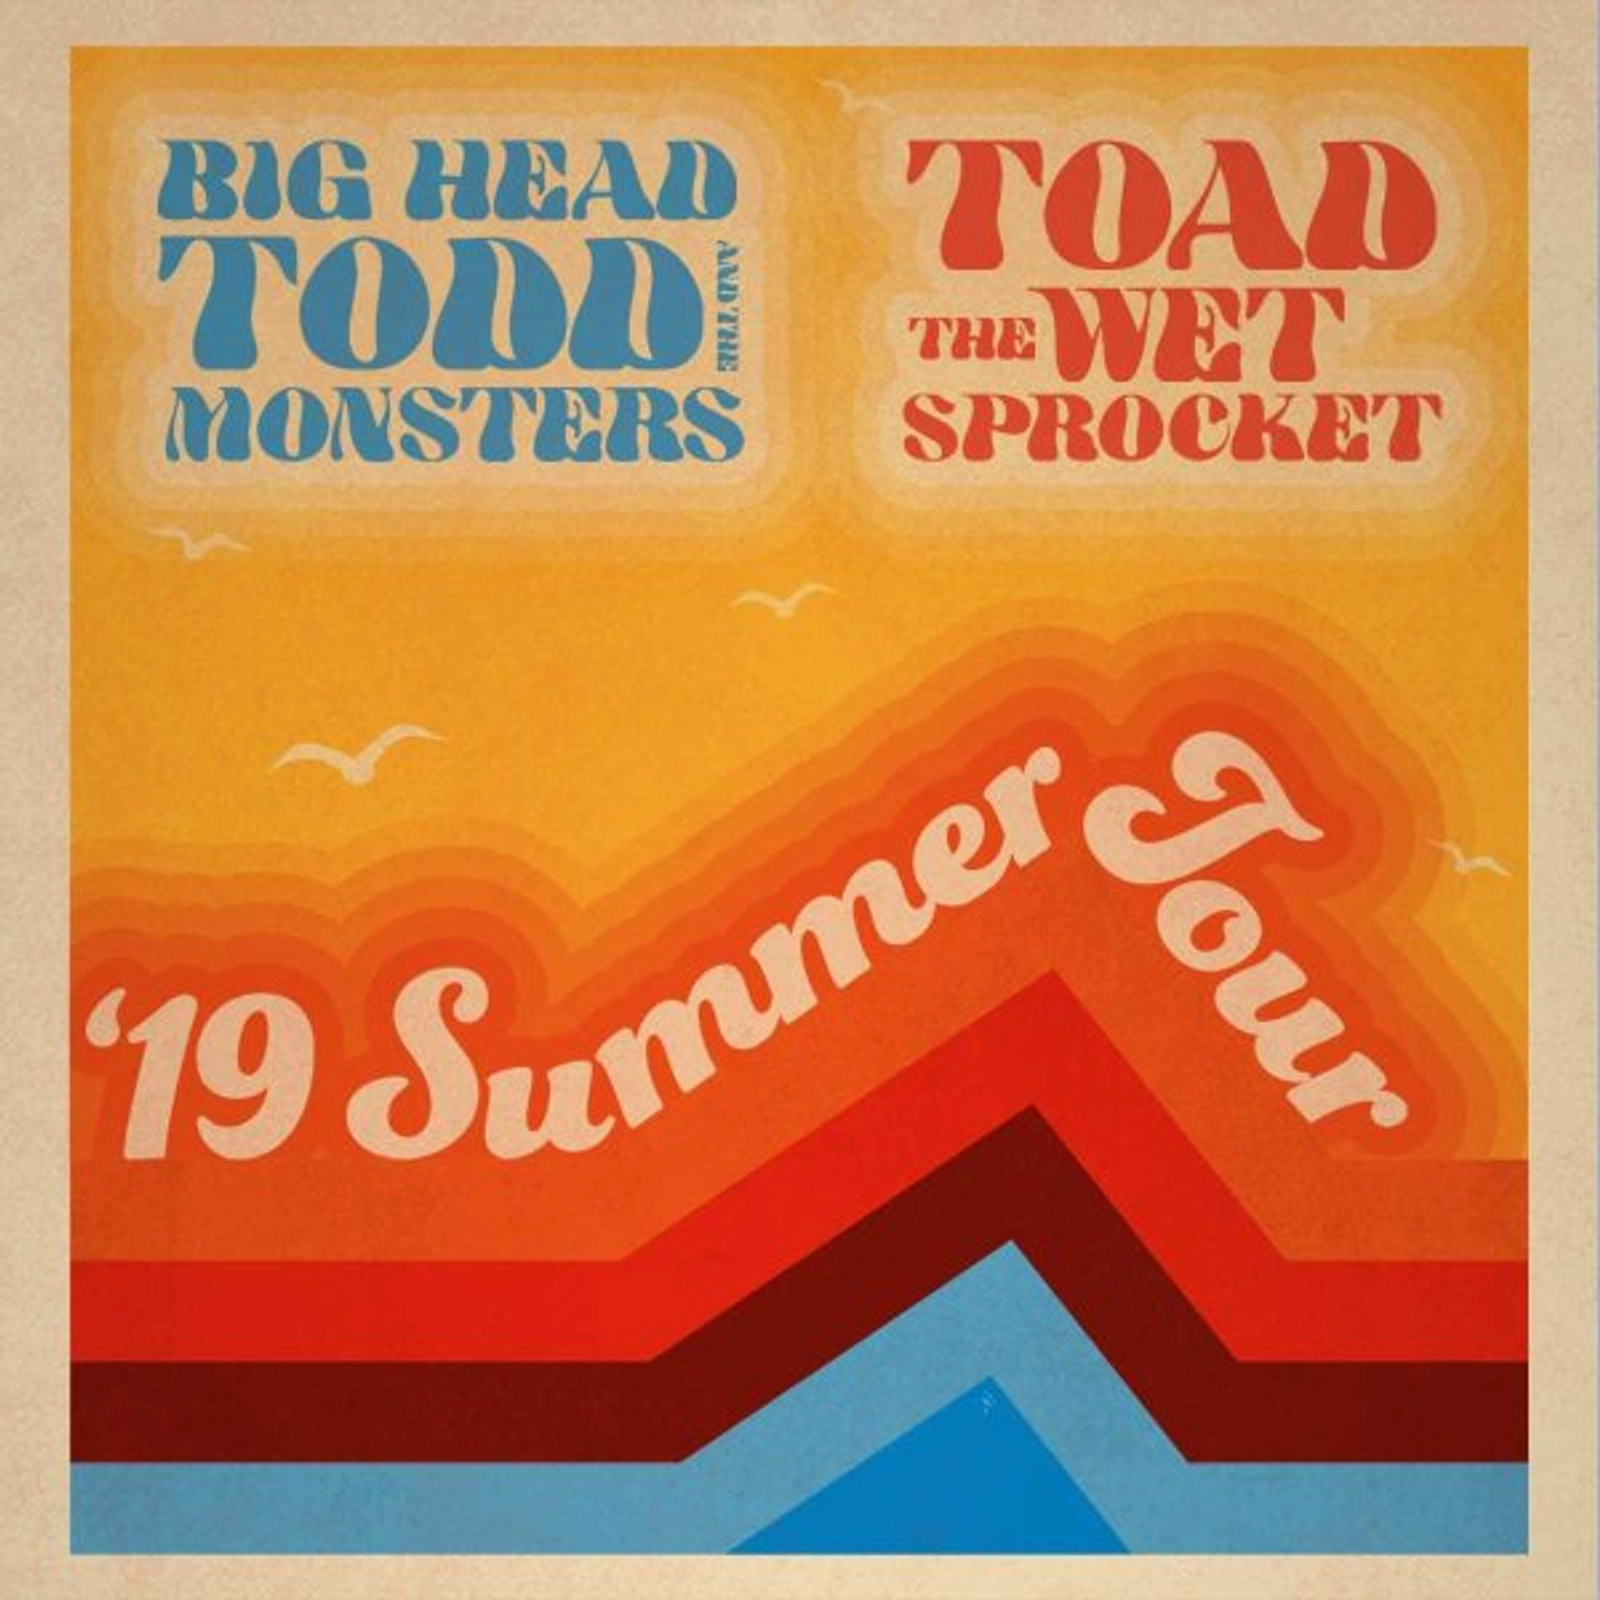 Win Big Head Todd and the Monsters and Toad the Wet Sprocket Tickets! - Thumbnail Image